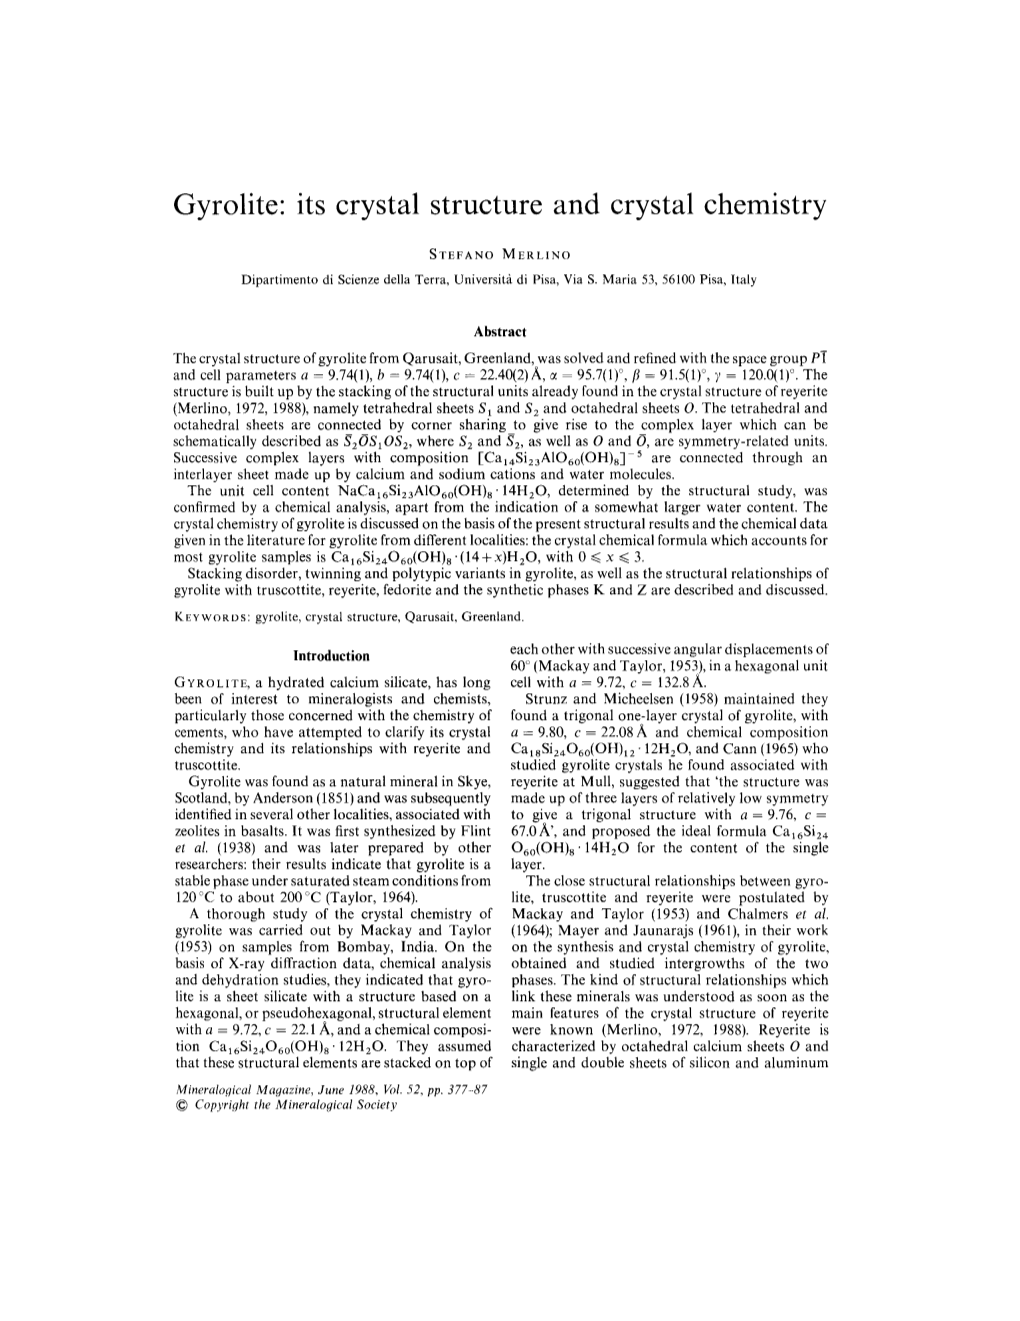 Gyrolite: Its Crystal Structure and Crystal Chemistry